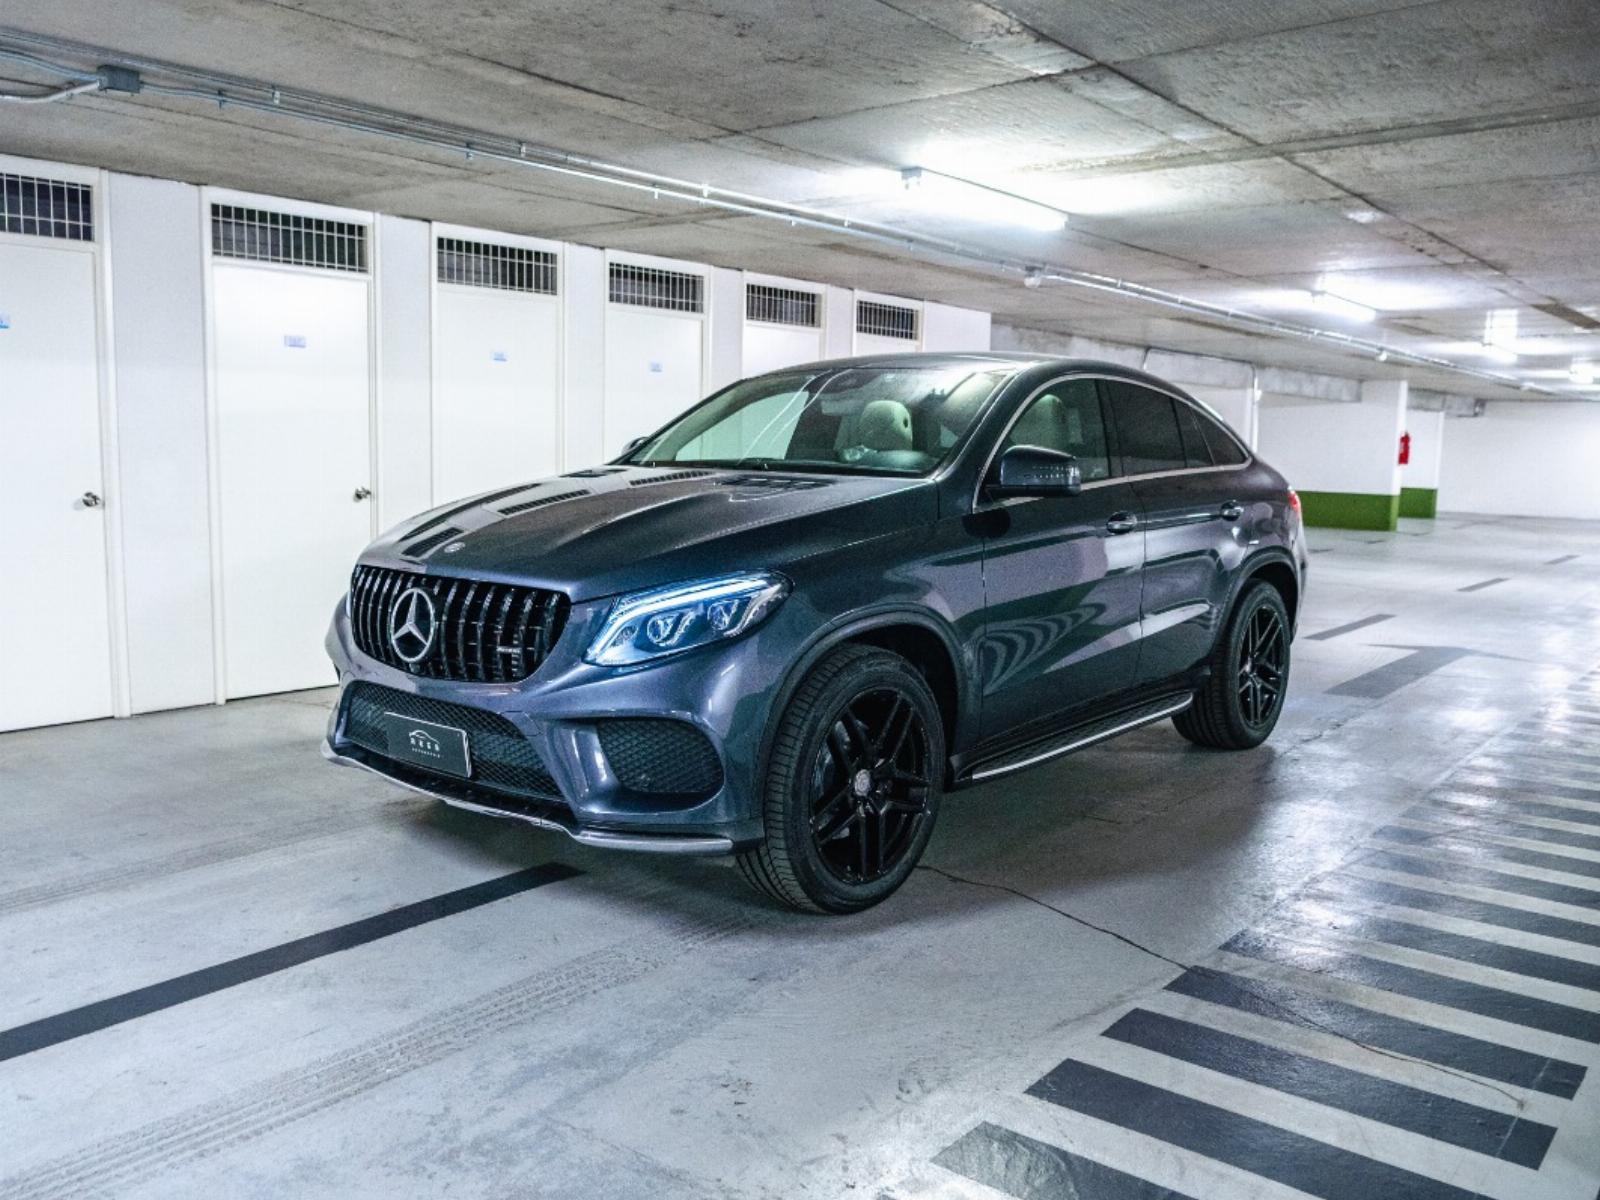 MERCEDES-BENZ GLE 350D Coupe 2016 - FULL MOTOR